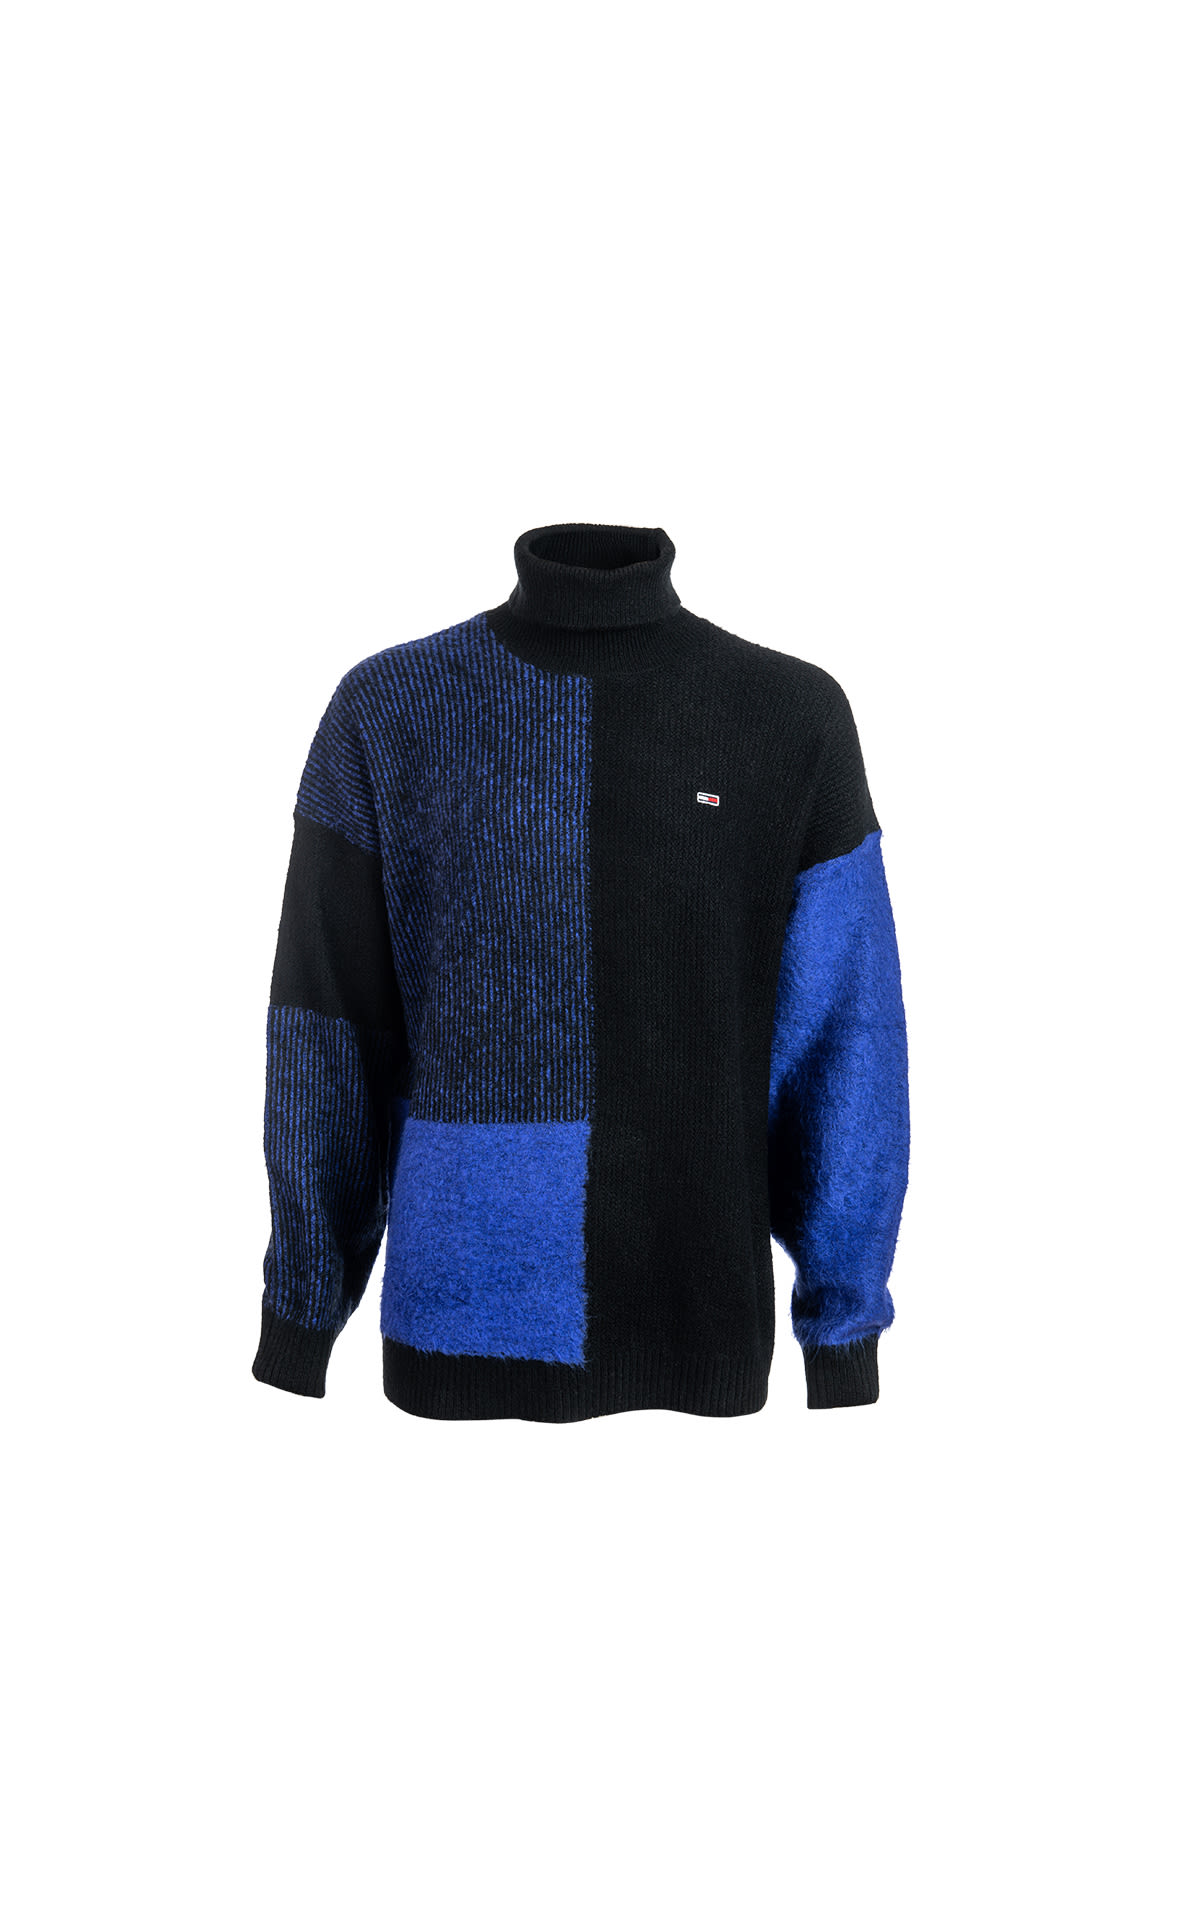 Tommy Hilfiger Multicolored turtleneck sweater